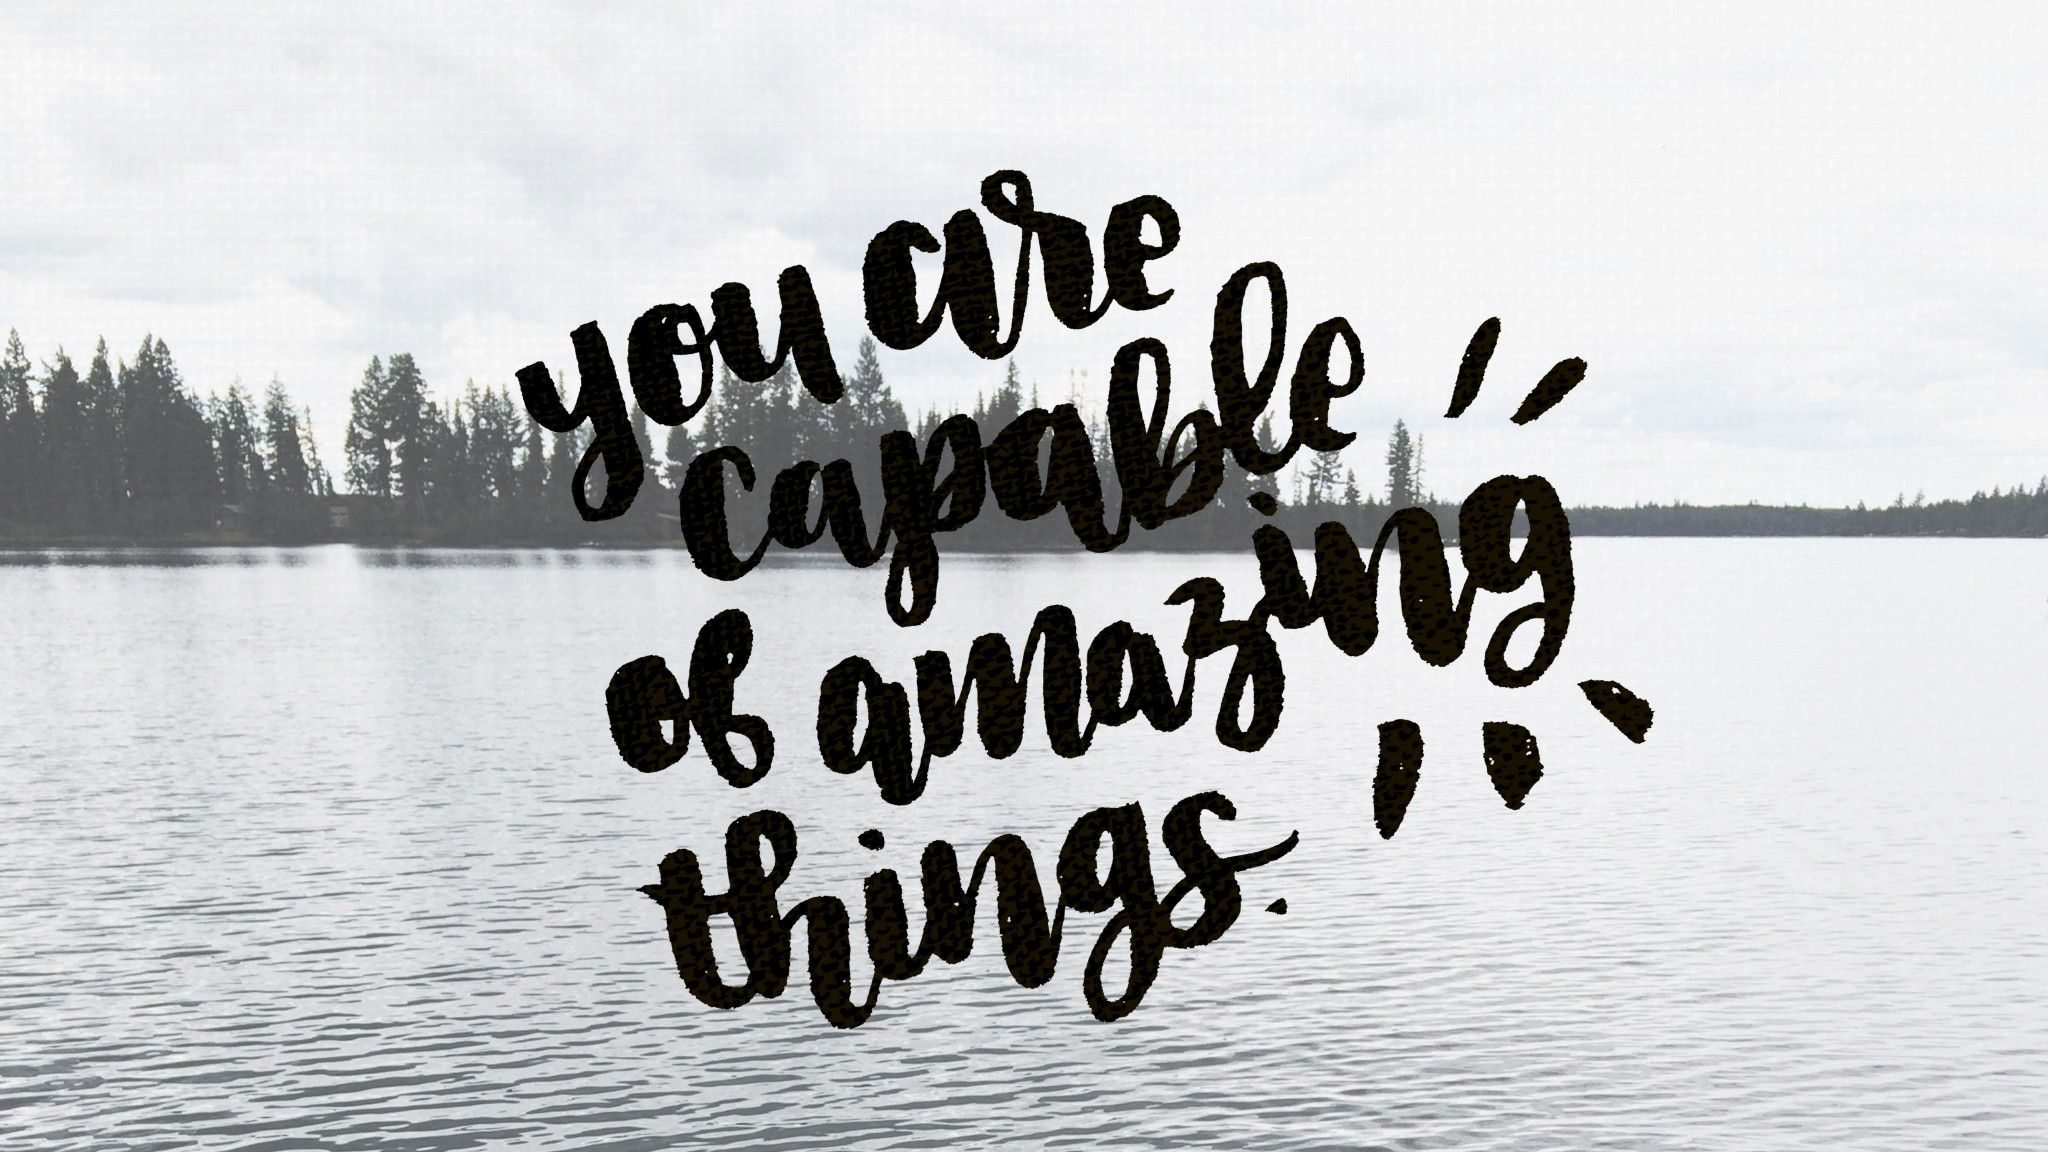 You Are Capable of Amazing Things: September Tech Wallpaper